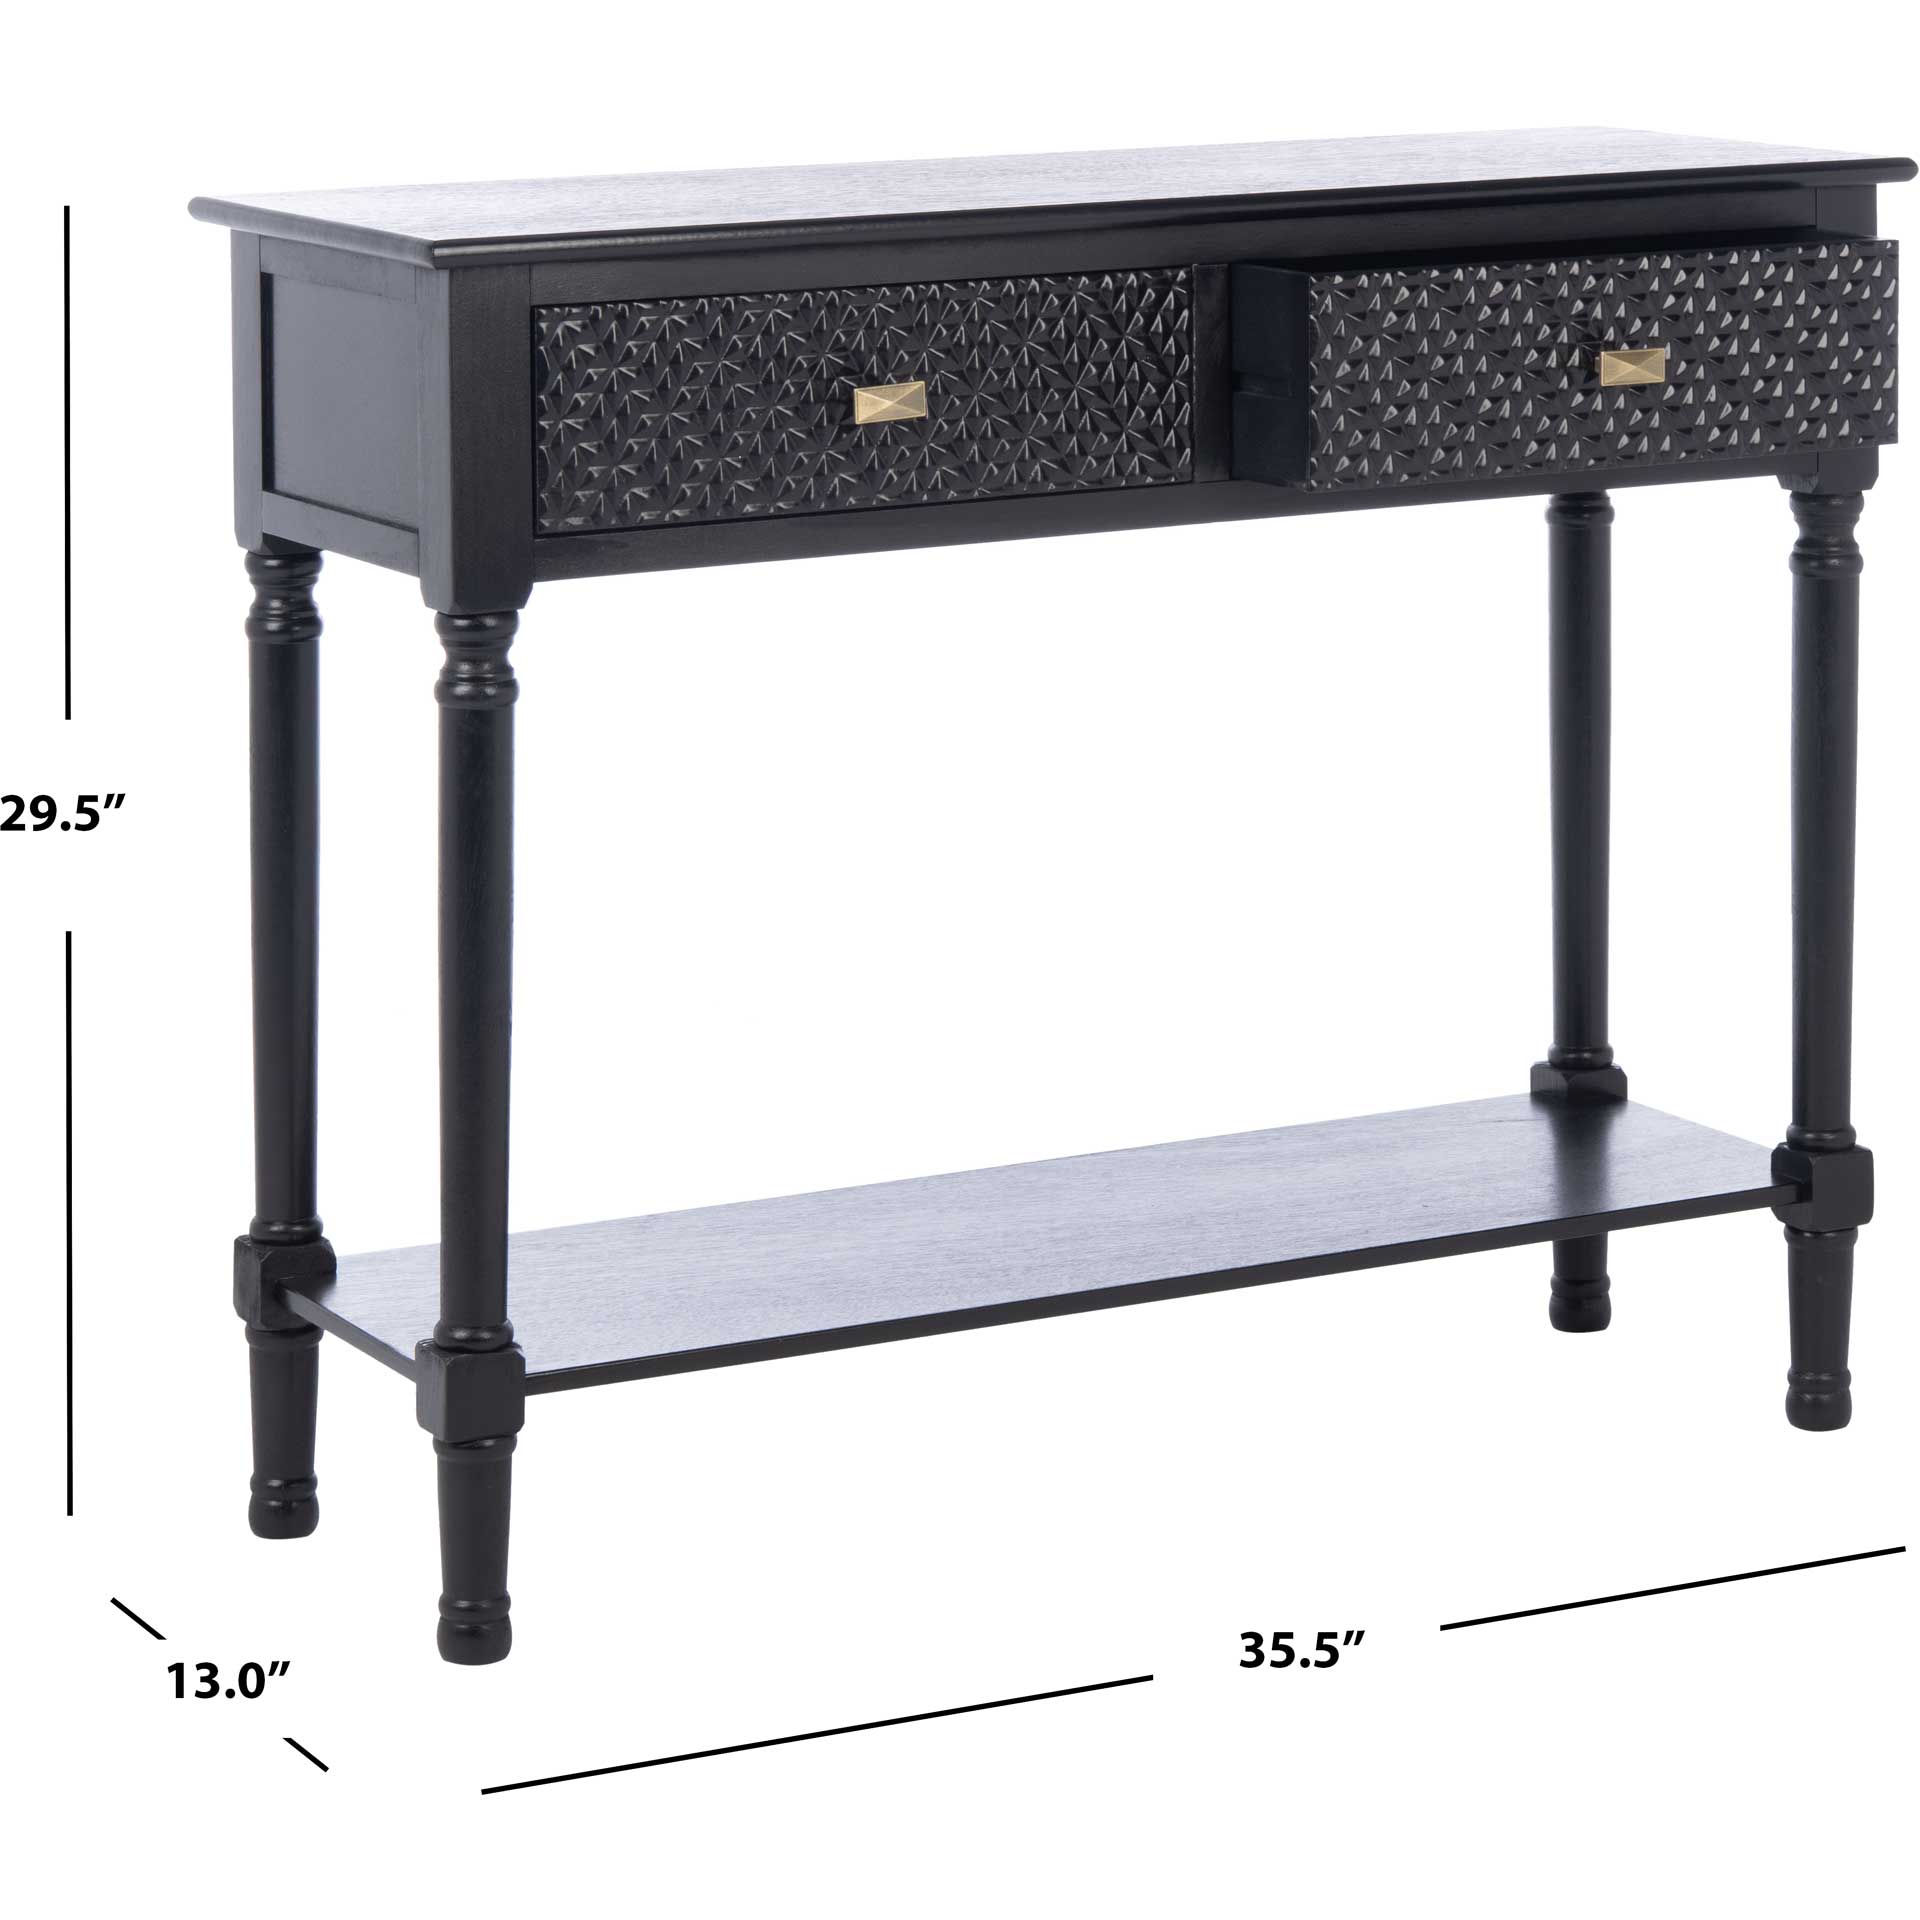 Haleigh 2 Drawer Console Table Black